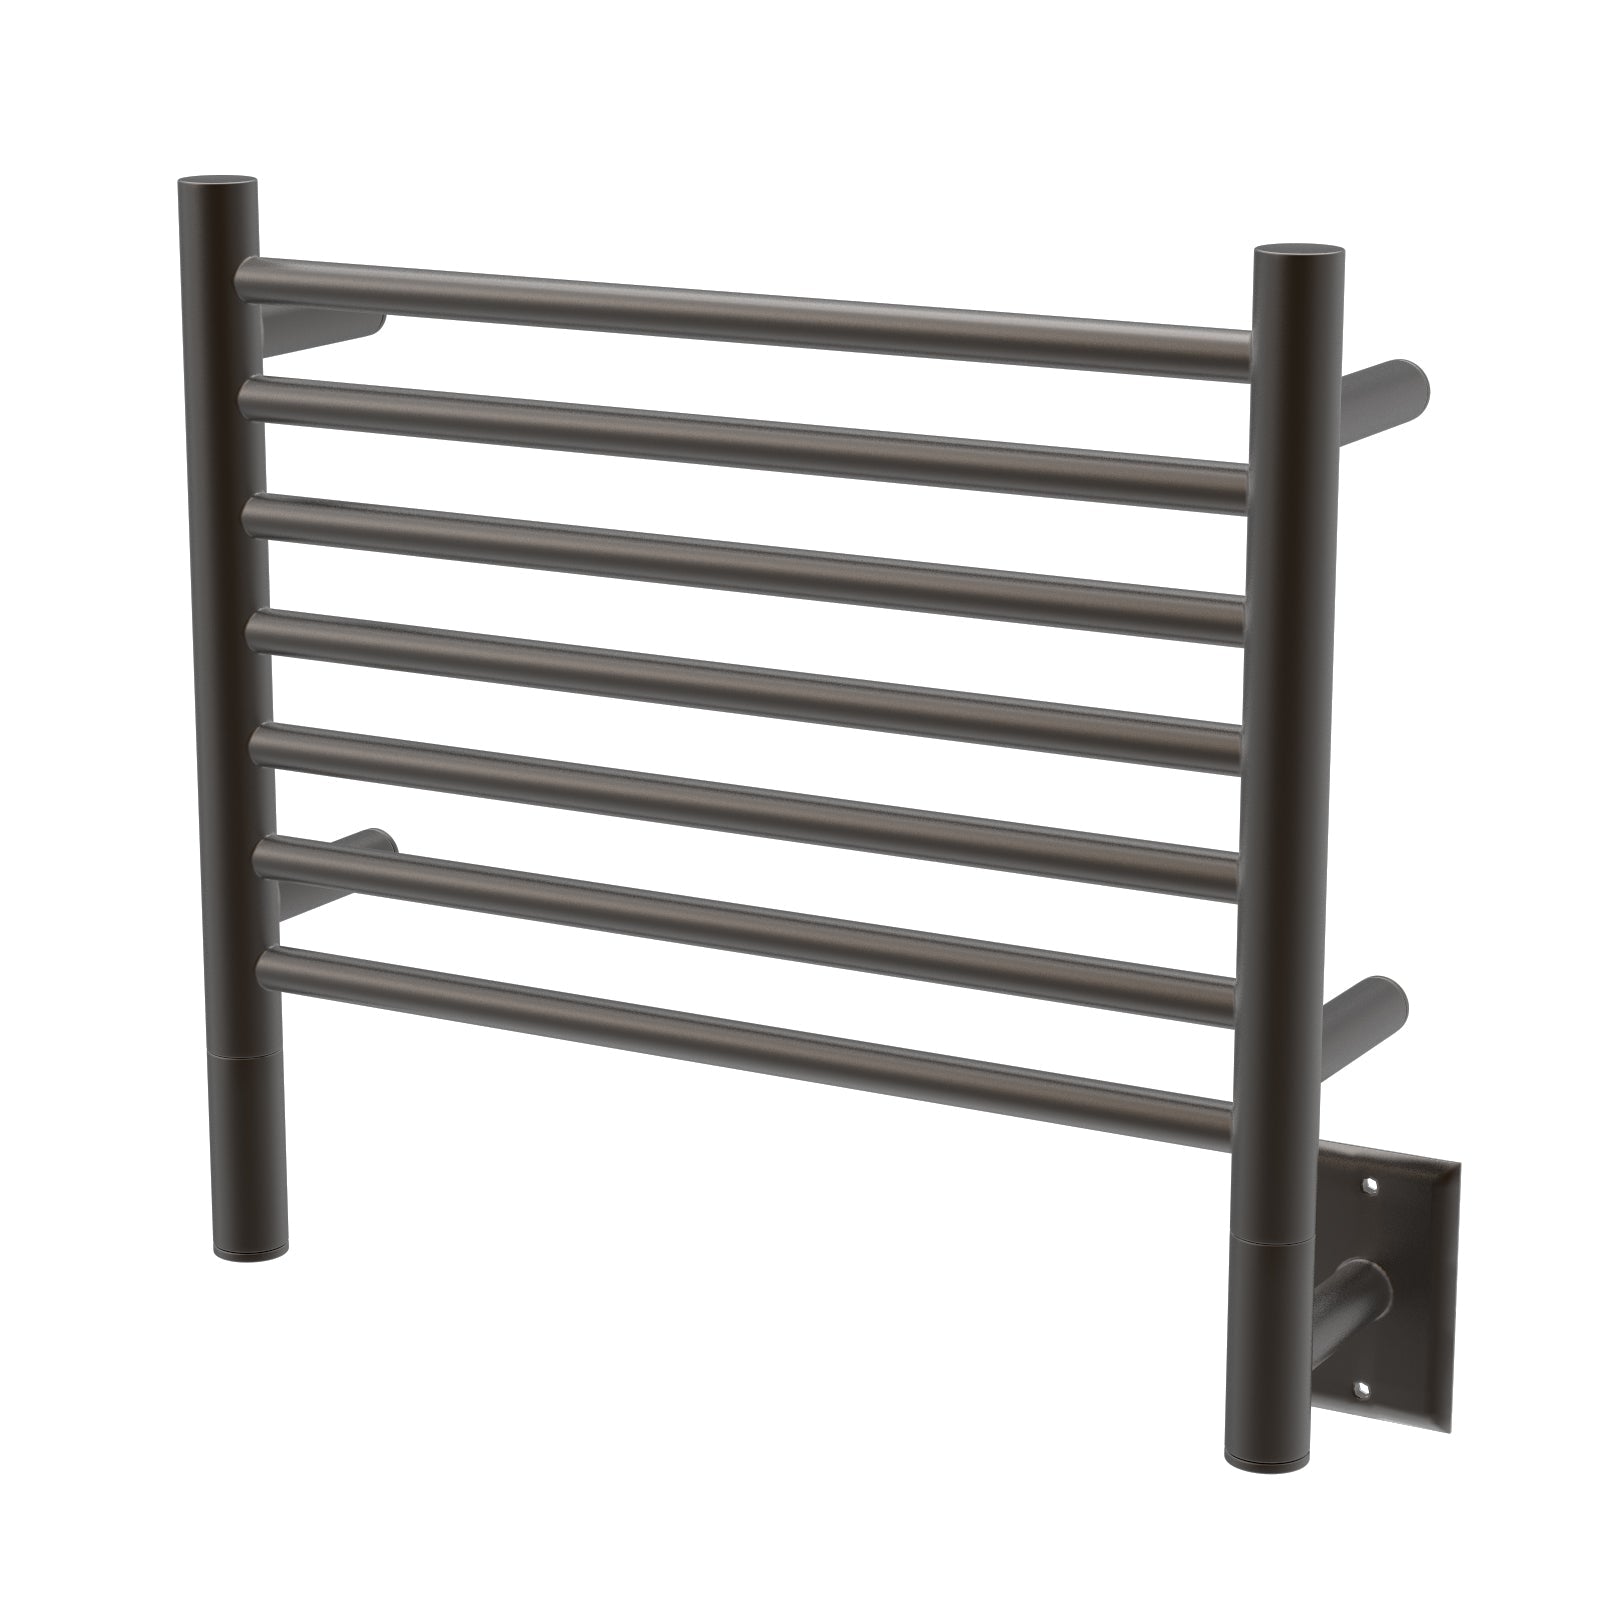 Oil Rubbed Bronze Towel Warmer, Amba Jeeves H Straight, Hardwired, 7 Bars, W 21" H 18"